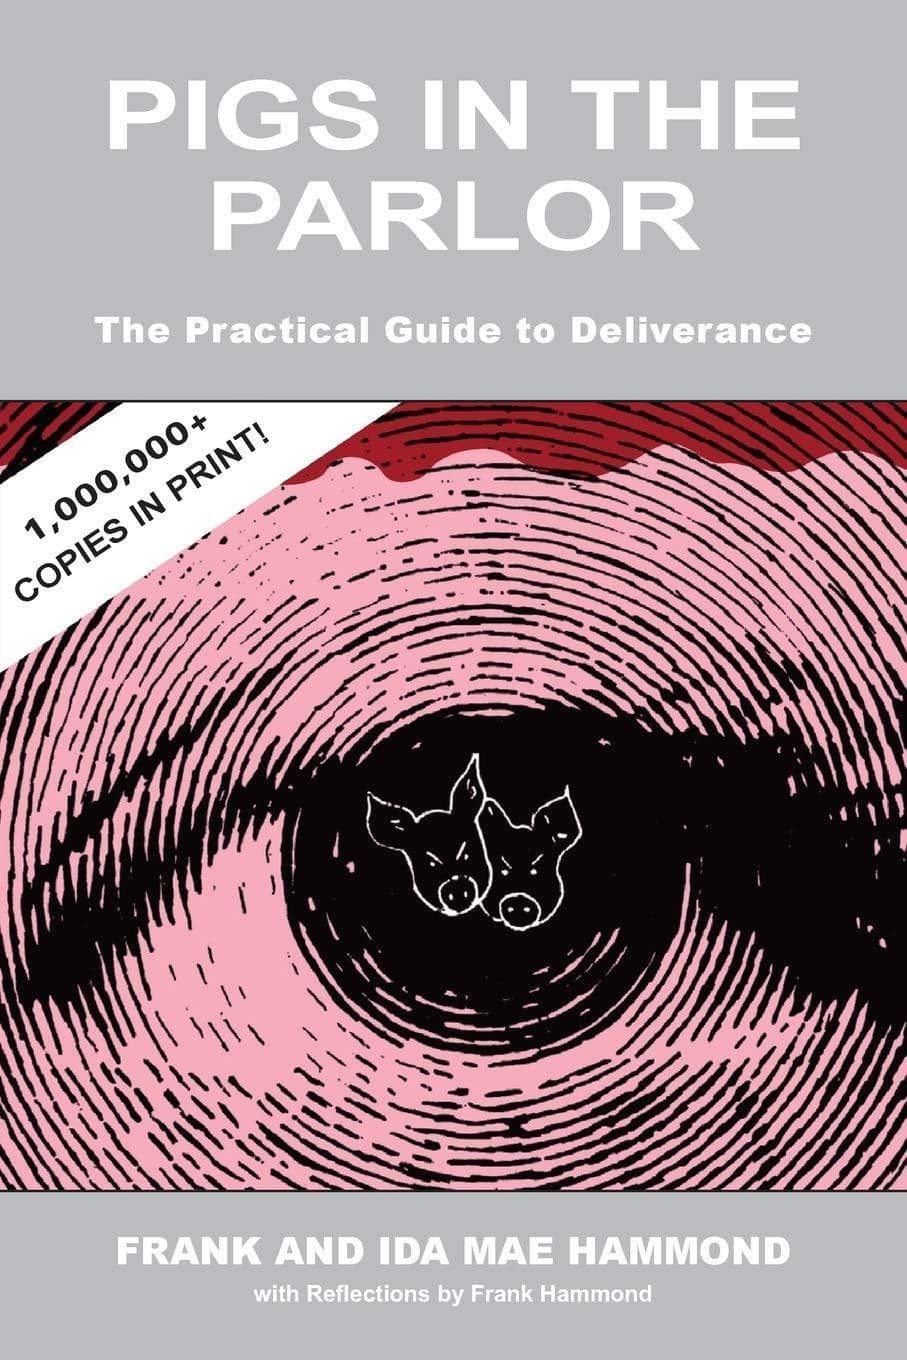 Pigs in the Parlor: A Practical Guide to Deliverance - SureShot Books Publishing LLC